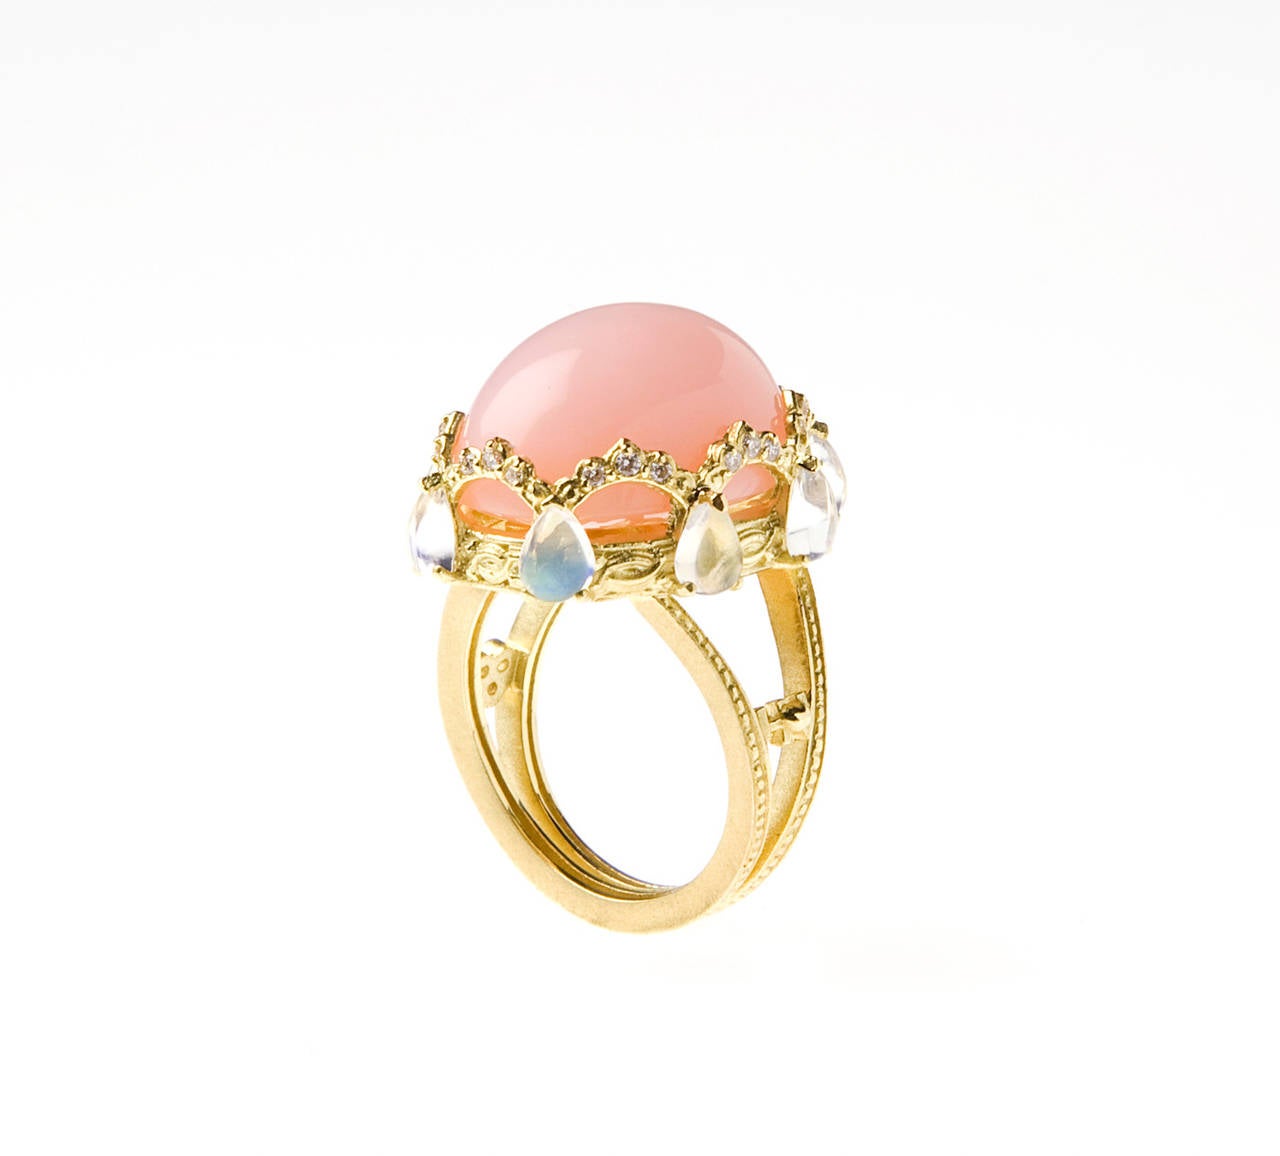 18K Gold Ring with Pink Peruvian Opal Center, Moonstones and Diamonds

Center stone is a 18.00 ct.Pink Peruvian Opal Center, 20 x 15mm

Surrounding the Center Stone are 0.22ct.G color VS quality diamonds and eight Pearshape Rainbow Moonstones